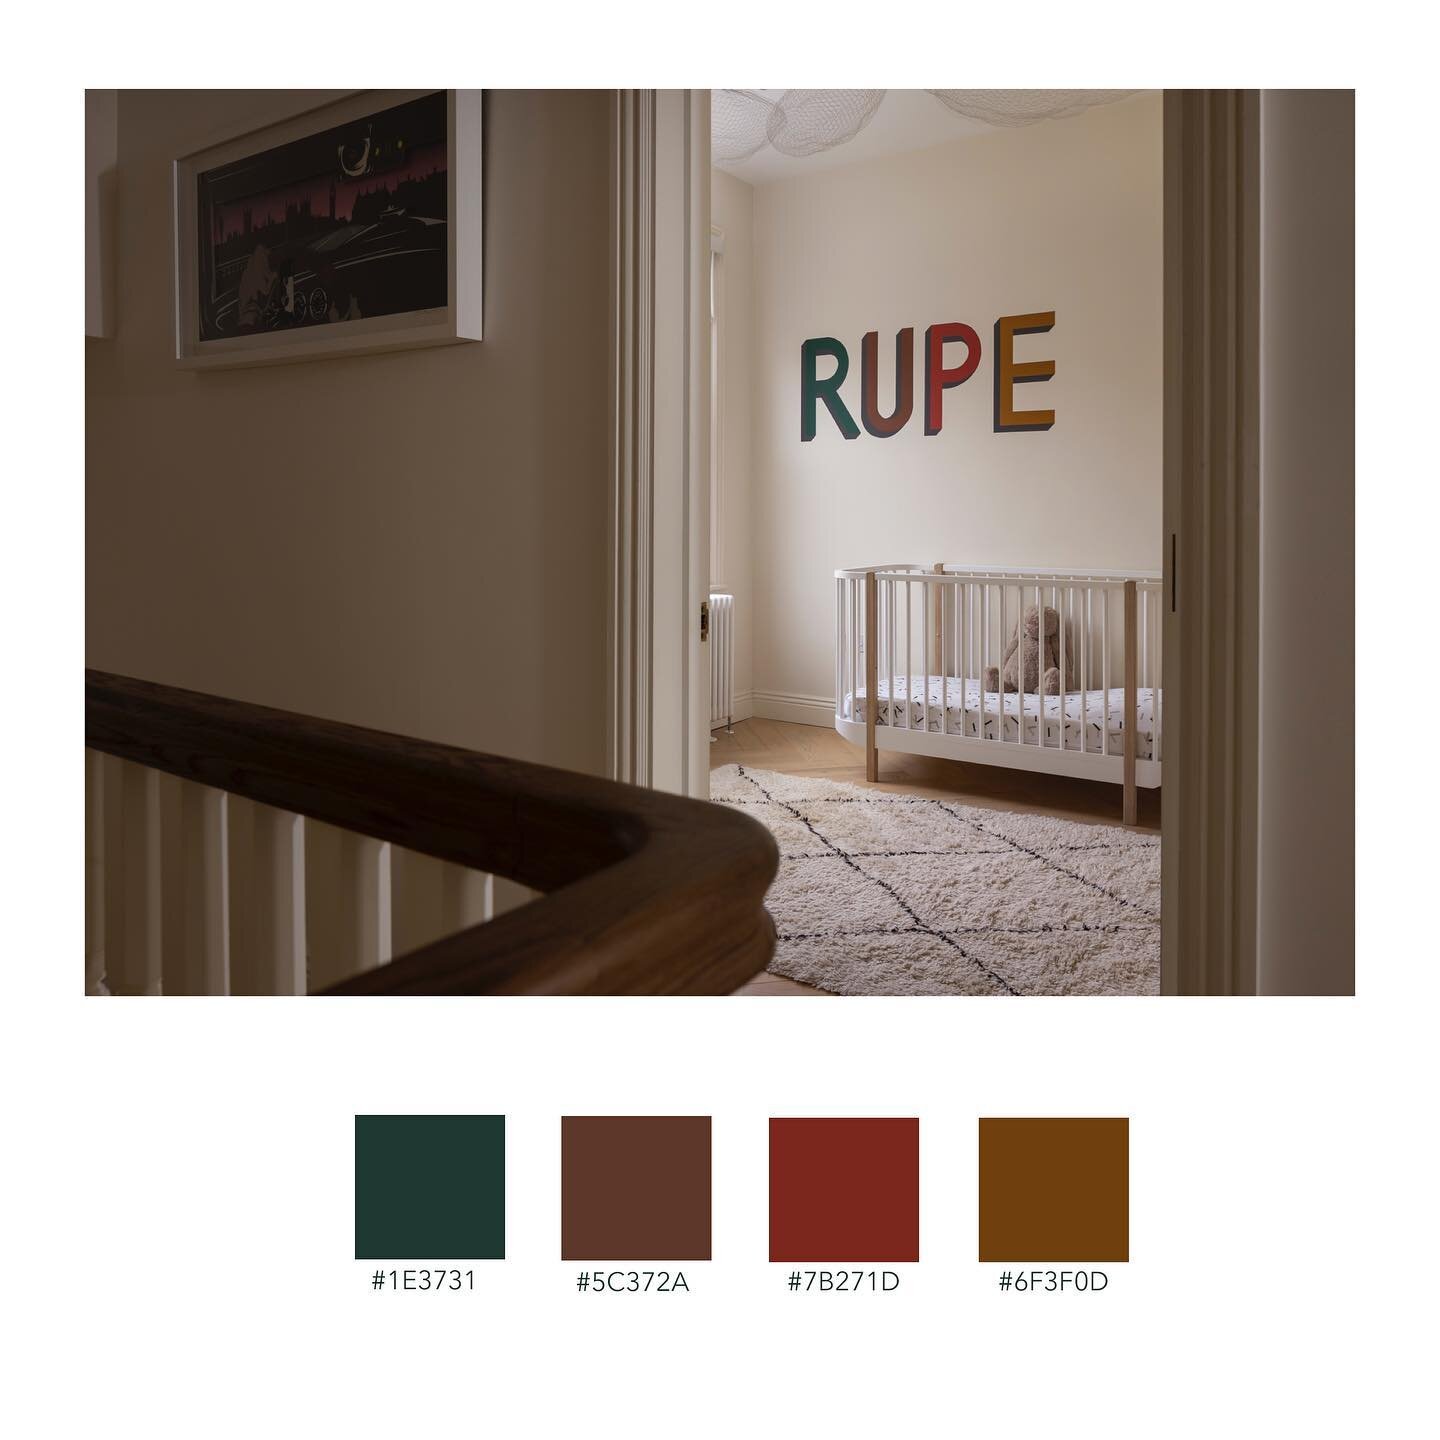 【RUPE - Brockley, SE4】
There was a real focus on fine materials on this project. The colours are understated and neutral drawing the eye to the woods, coving and finishes. 
However, dashes of colour in paint and art bring some life to the subtle pale